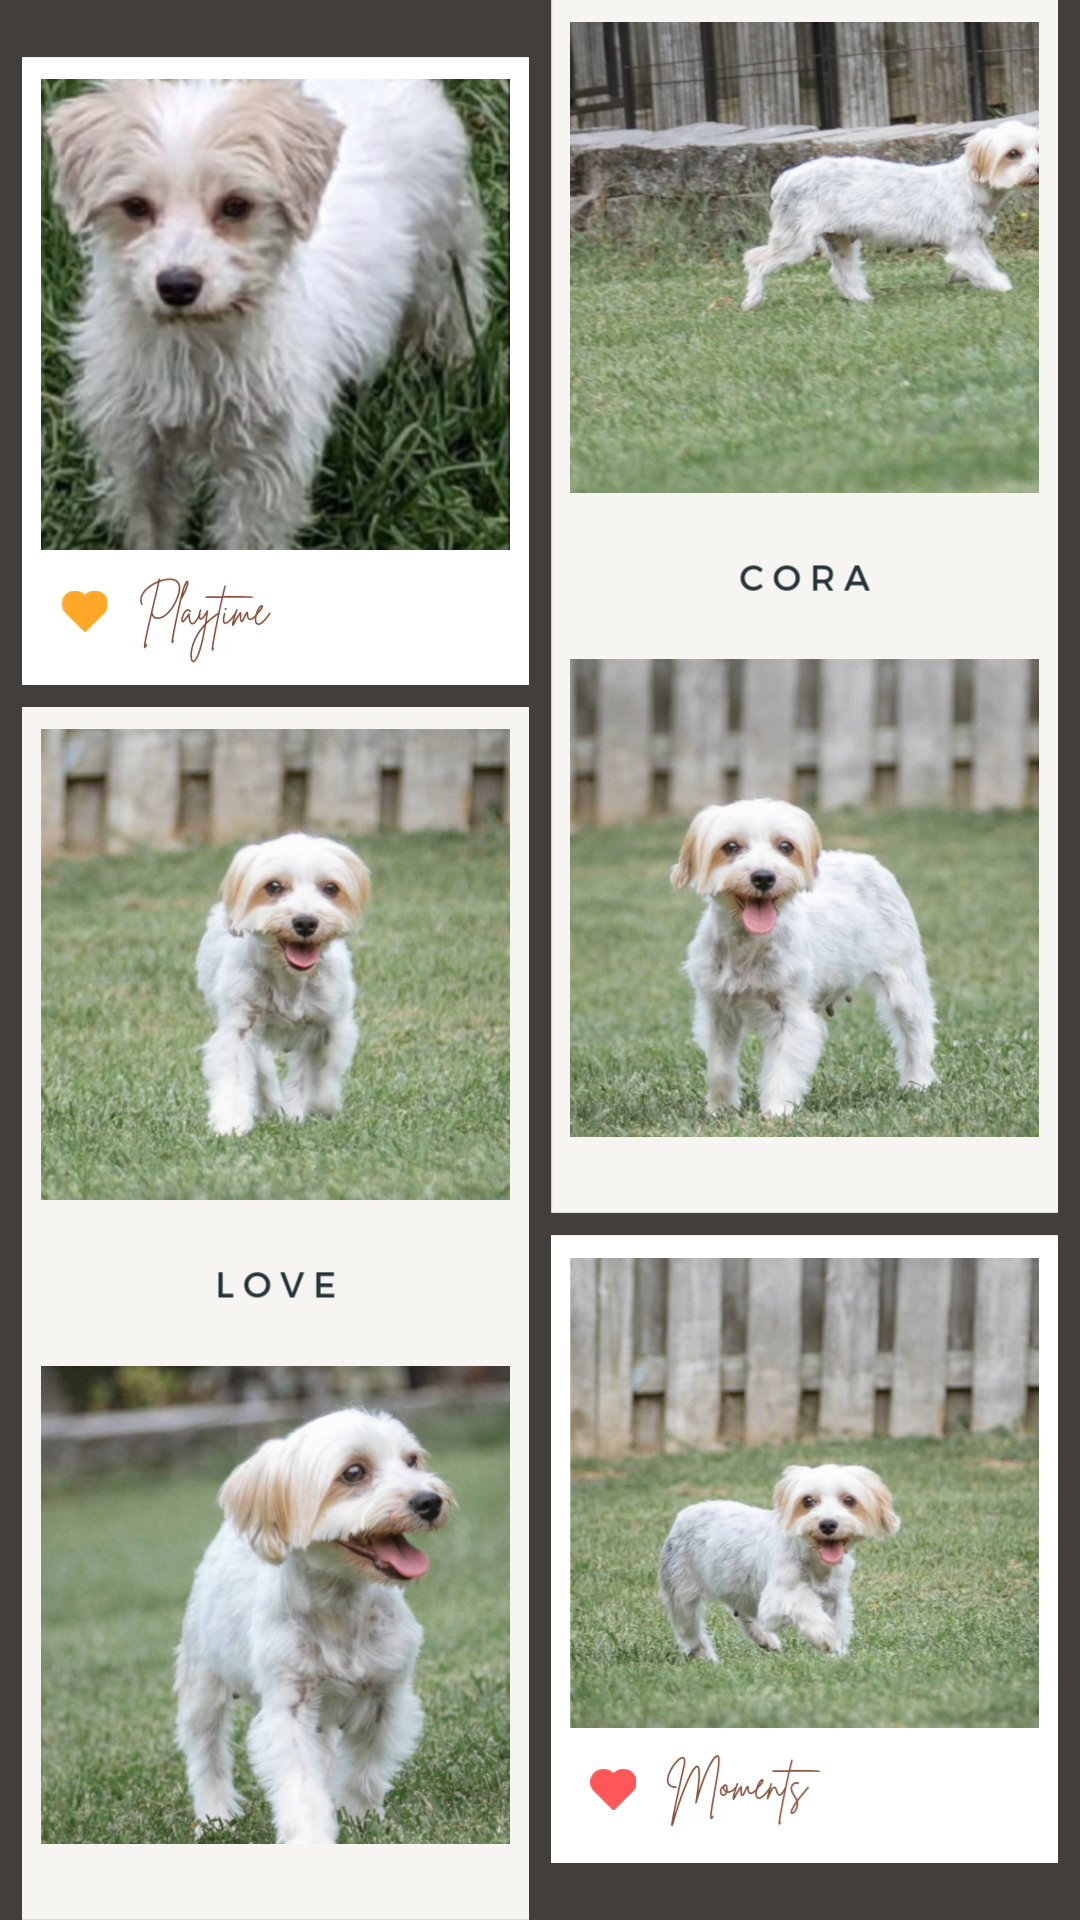 Cora AKC on hold in Washington, District of Columbia